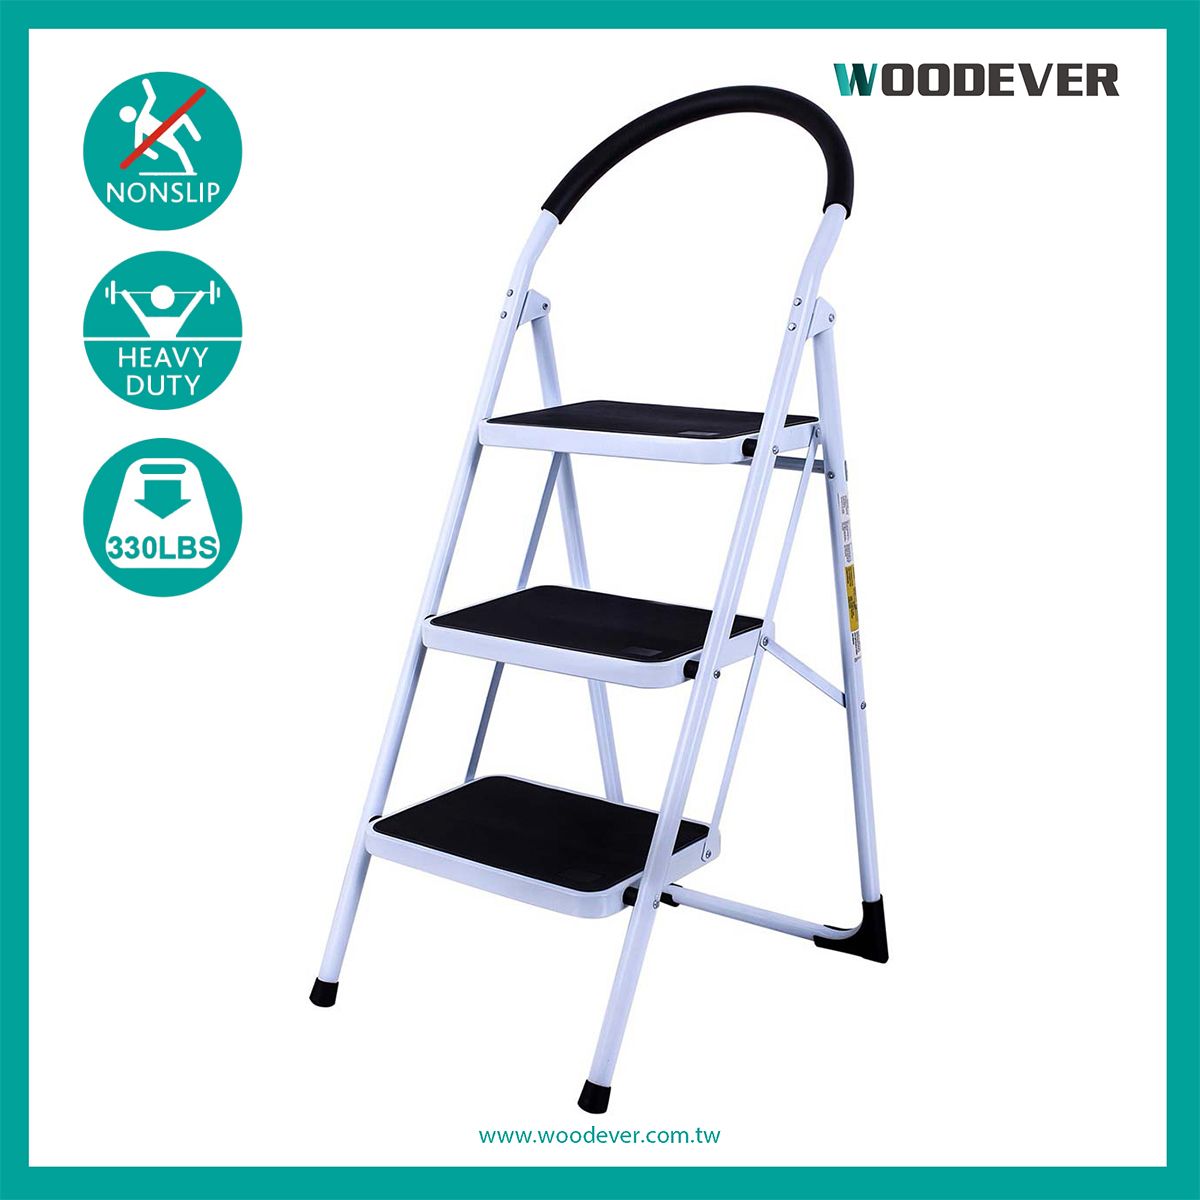 150kg capacity steel step ladder with X-shaped reinforcement strip  The best folding step stool with three ladders is the ideal height for reaching indoor and outdoor items such as in kitchens, office windows, storage rooms, and closets